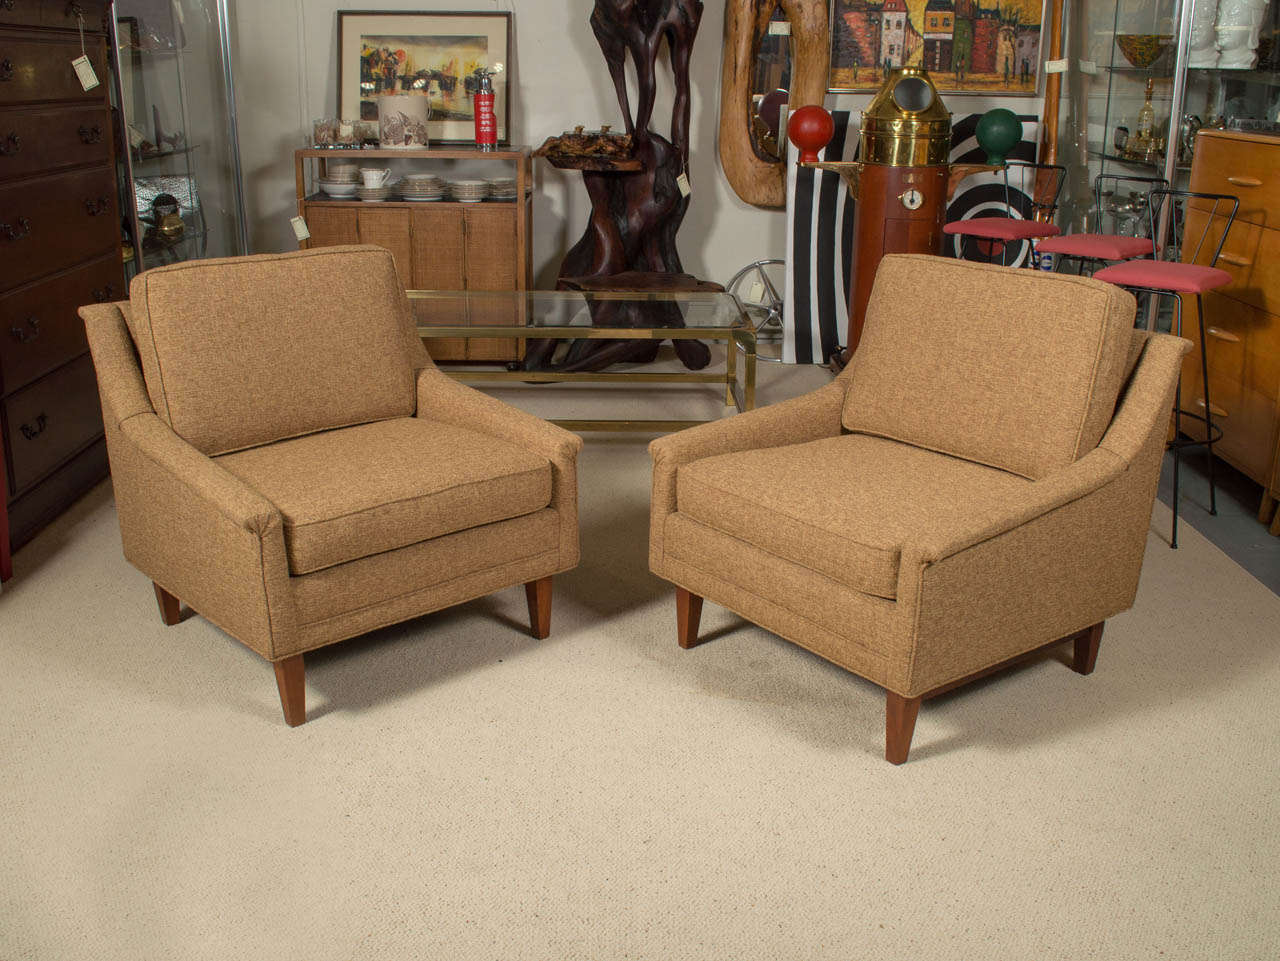 A very handsome pair of Mid-Century upholstered lounge or club chairs with walnut legs.

Sweeping winglet arms recall Folk Ohlsson’s signature designs for DUX. Classic 1950s American body has comfortable proportions, broad sides and back, and